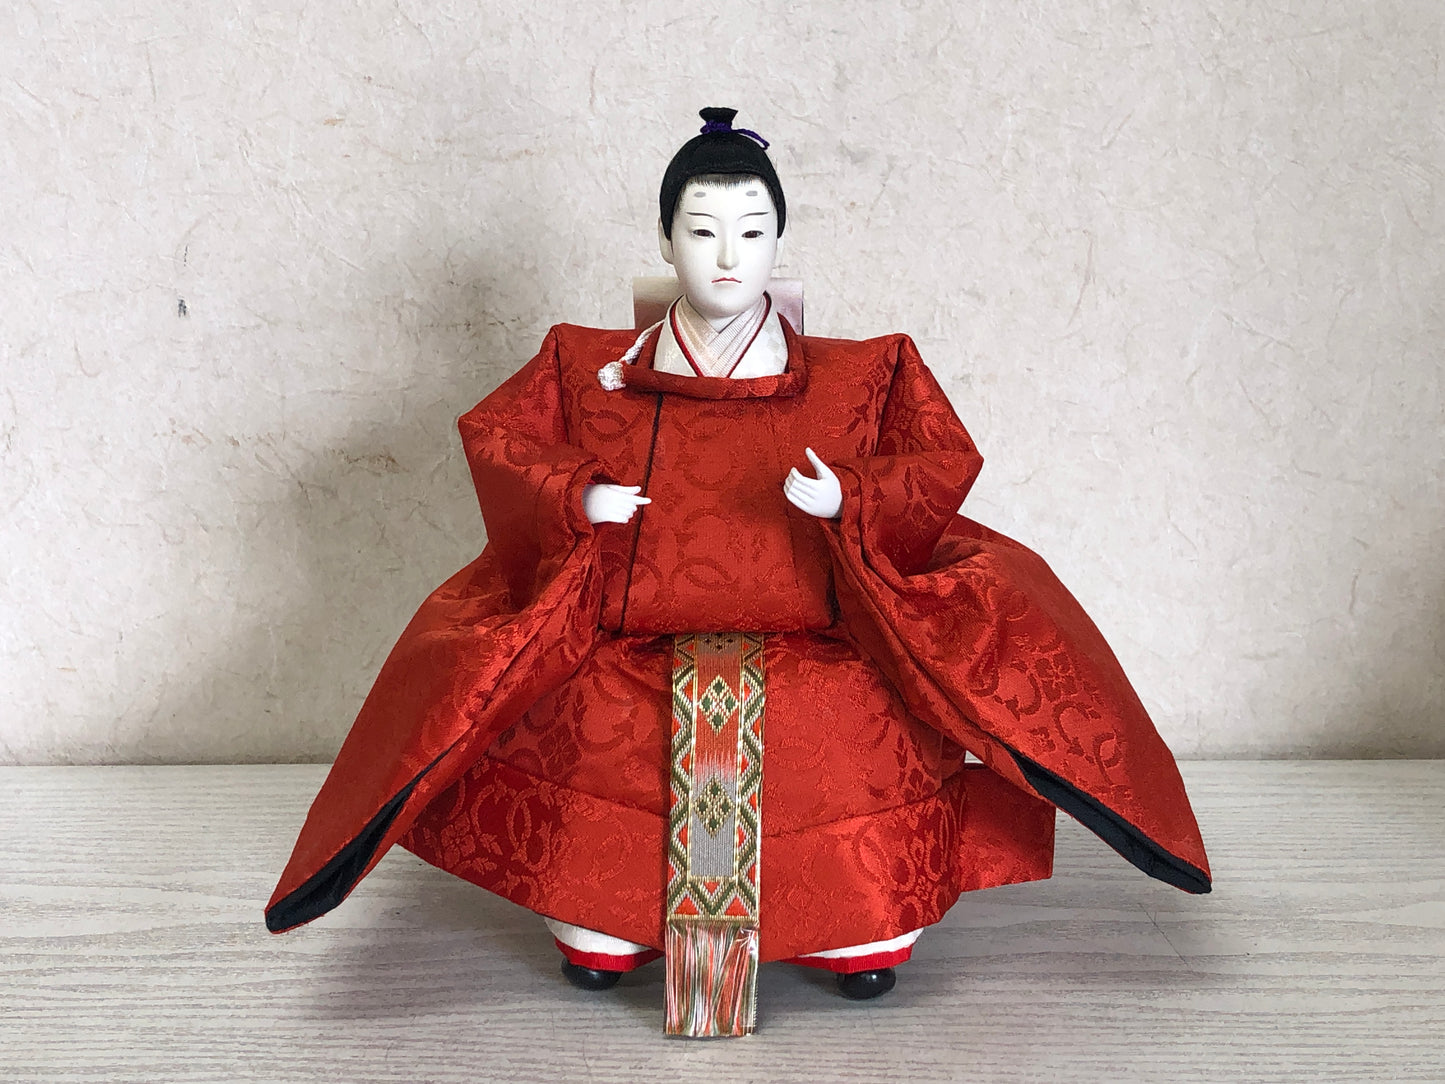 Y3159 HINA DOLL Ministers Left Right guard figure figurine Japan antique vintage